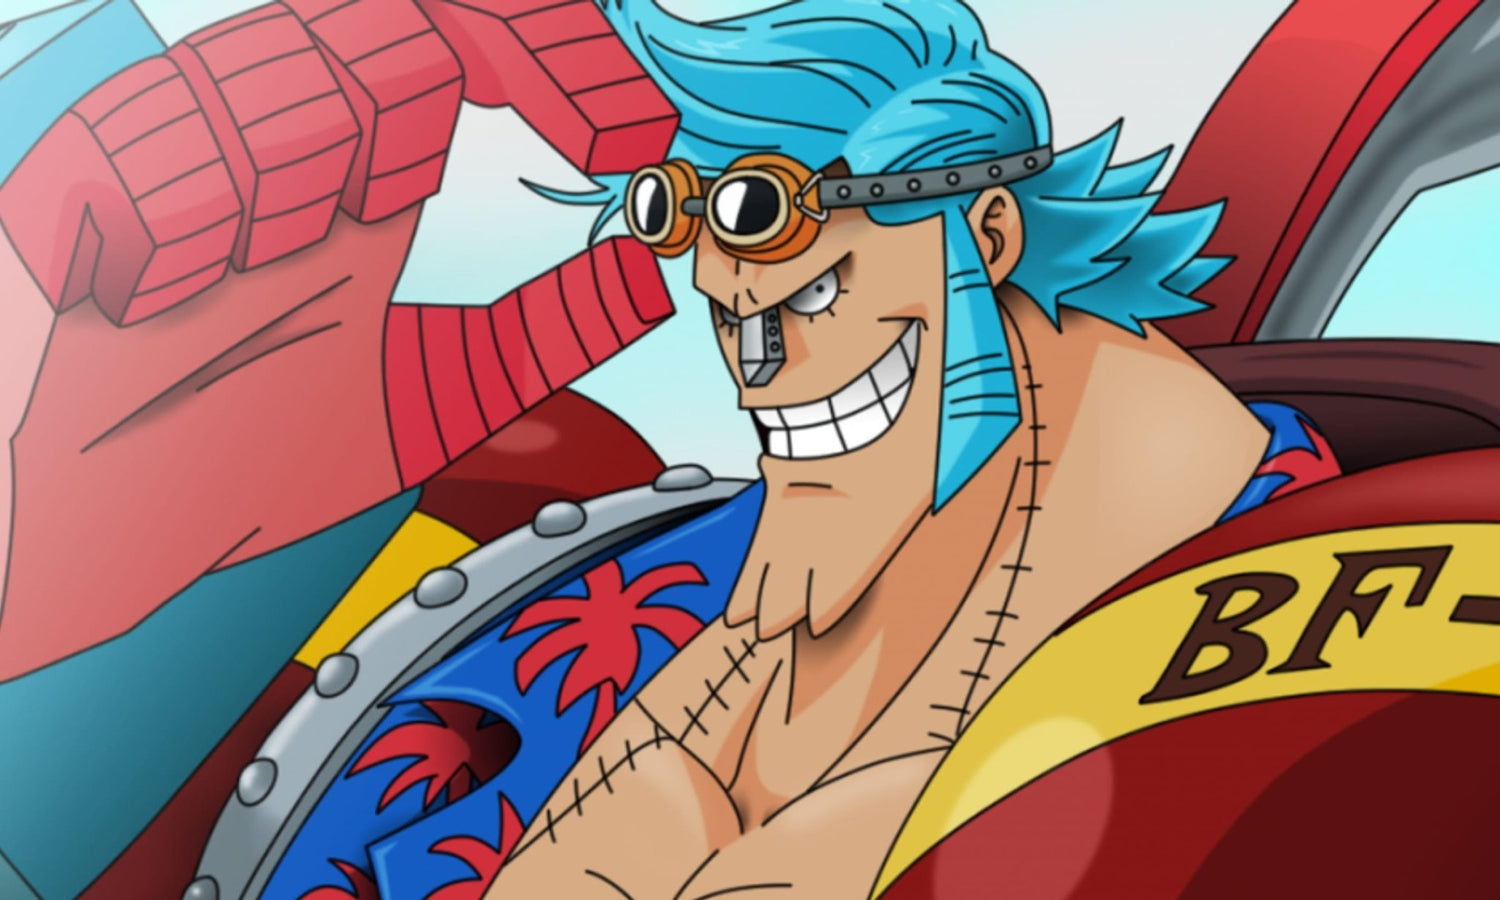 Franky from One Piece: The Super Cyborg of the Straw Hat Pirates - Seakoff